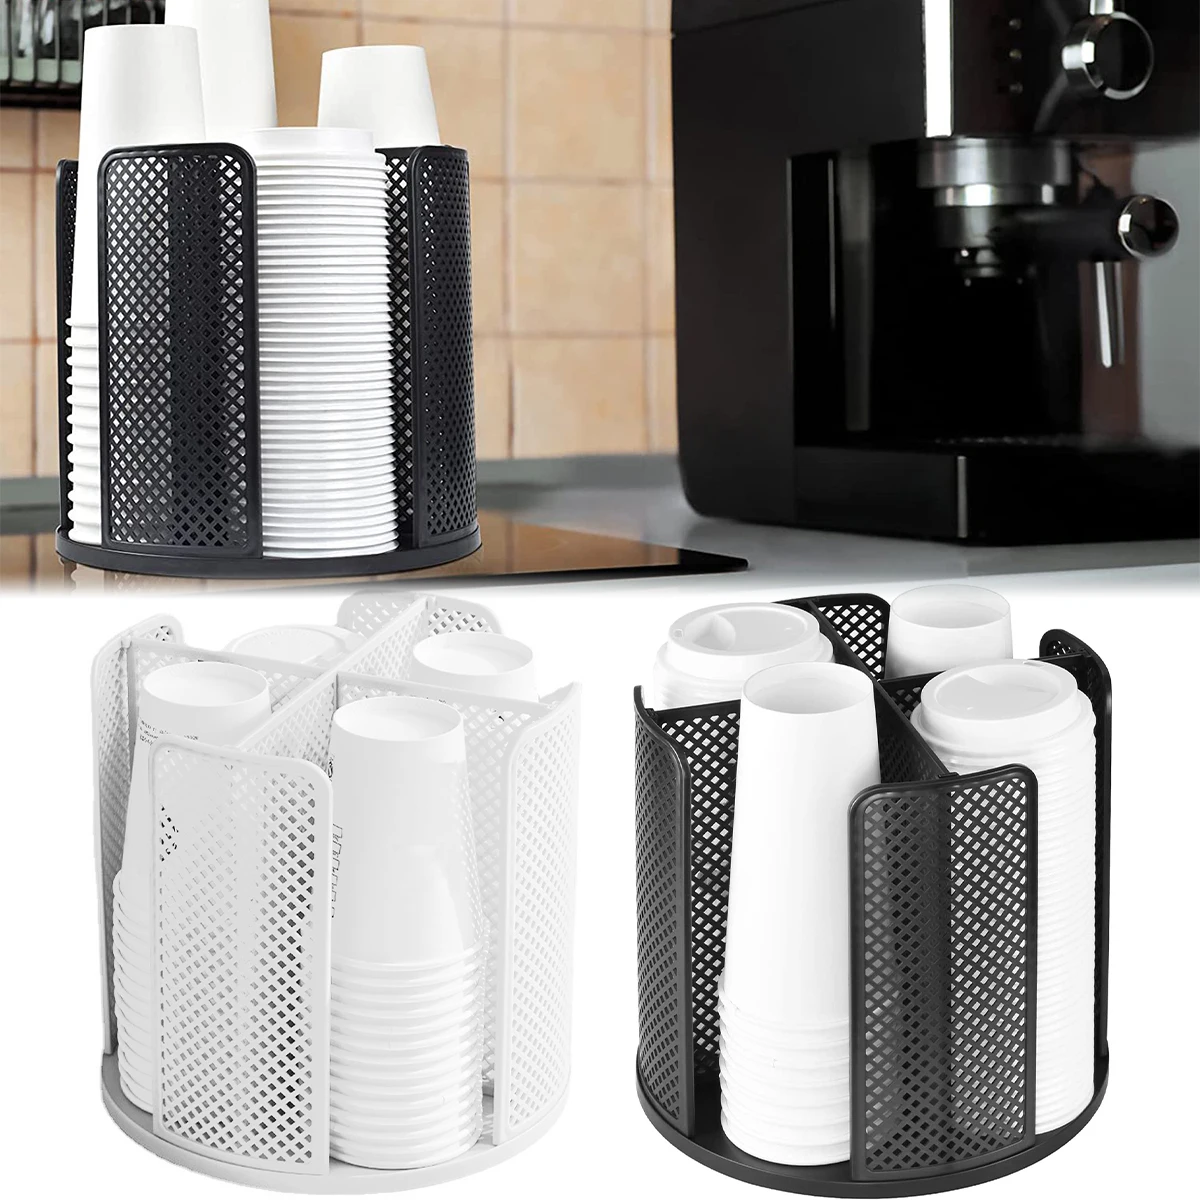 

Cup Dispenser 360° Rotatable 4 Compartment Cups and Lids Holder Detachable Desktop Coffee Cup Dispenser Multifunctional Cup